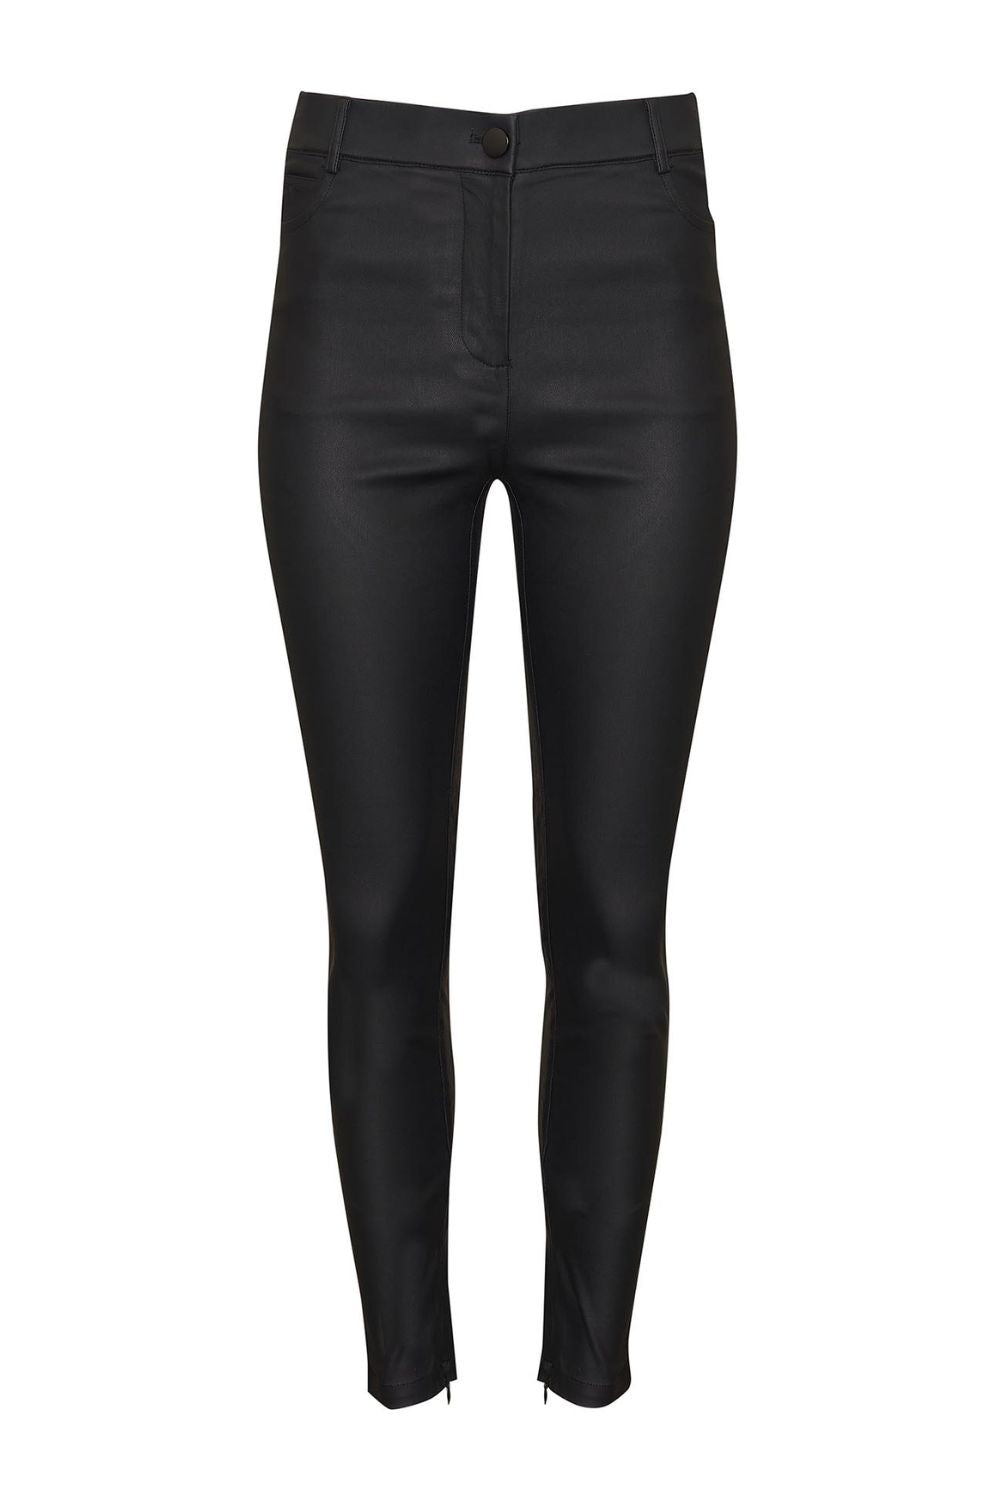 Contest pant - Black coated